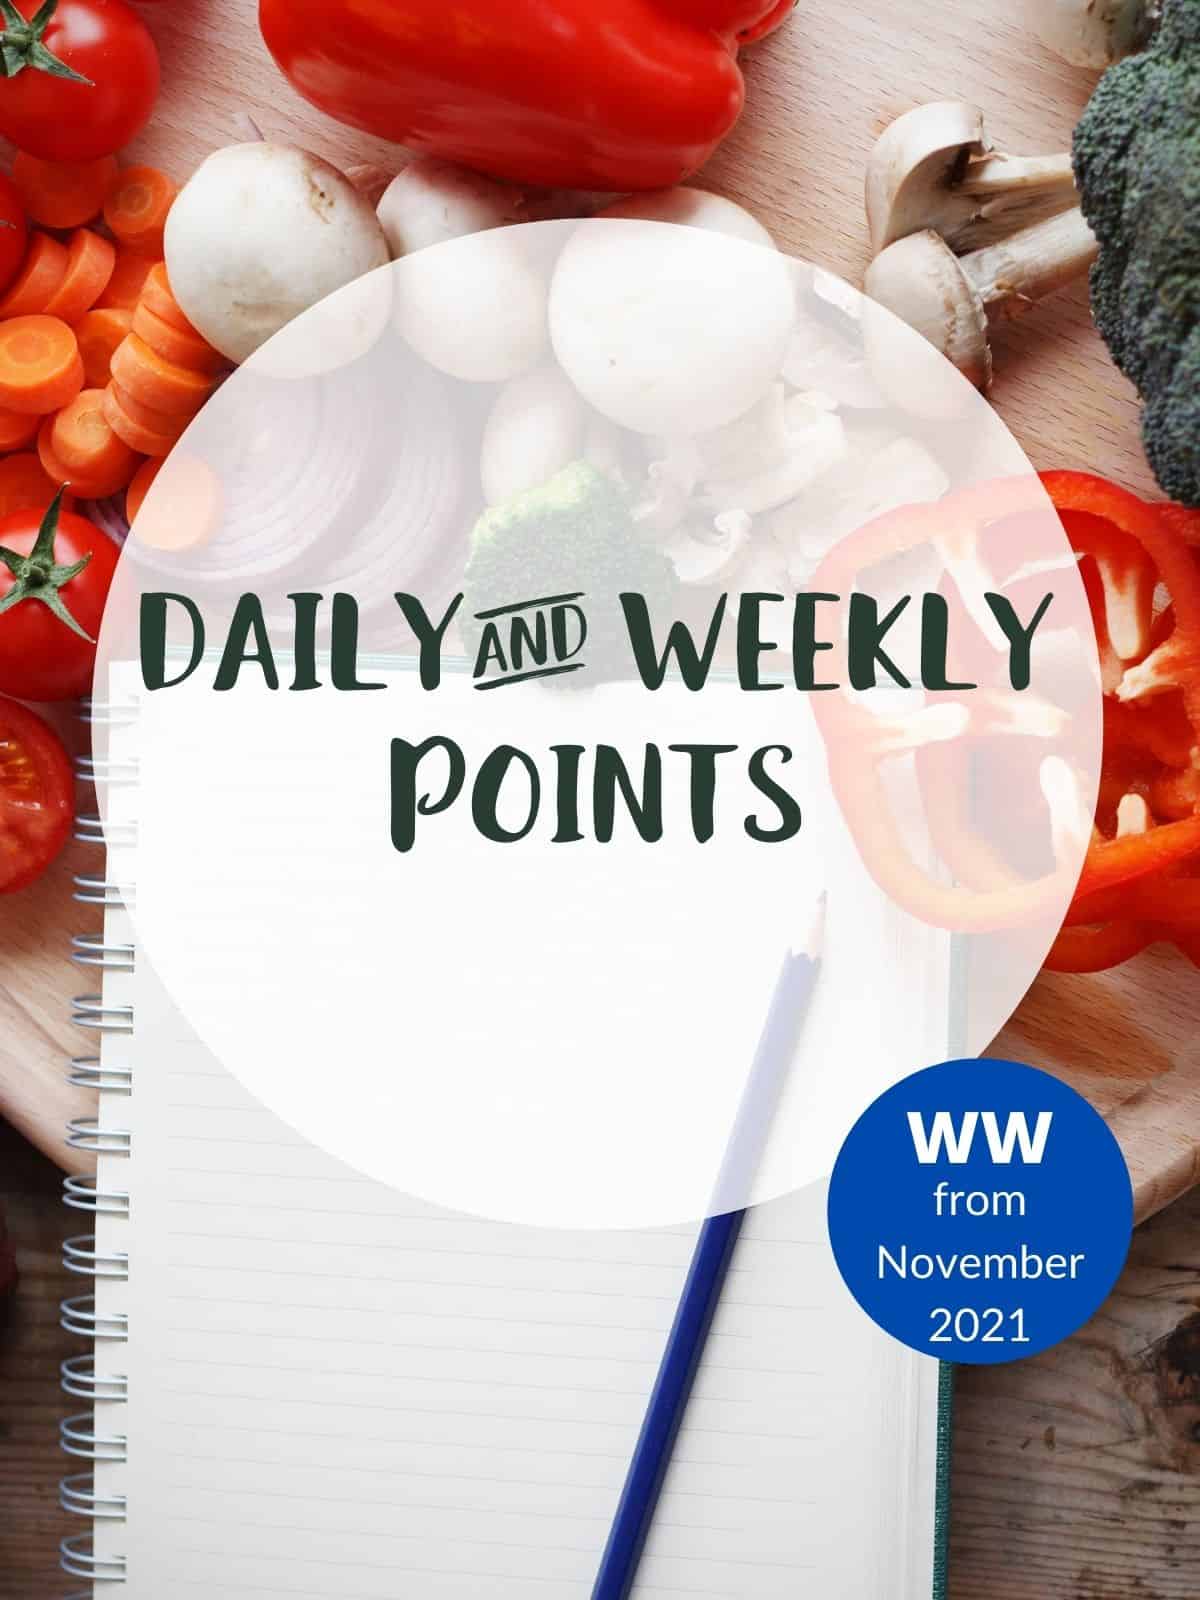 Some vegetables on a table with text overlay stating Daily and Weekly Points - WW from November 2021.